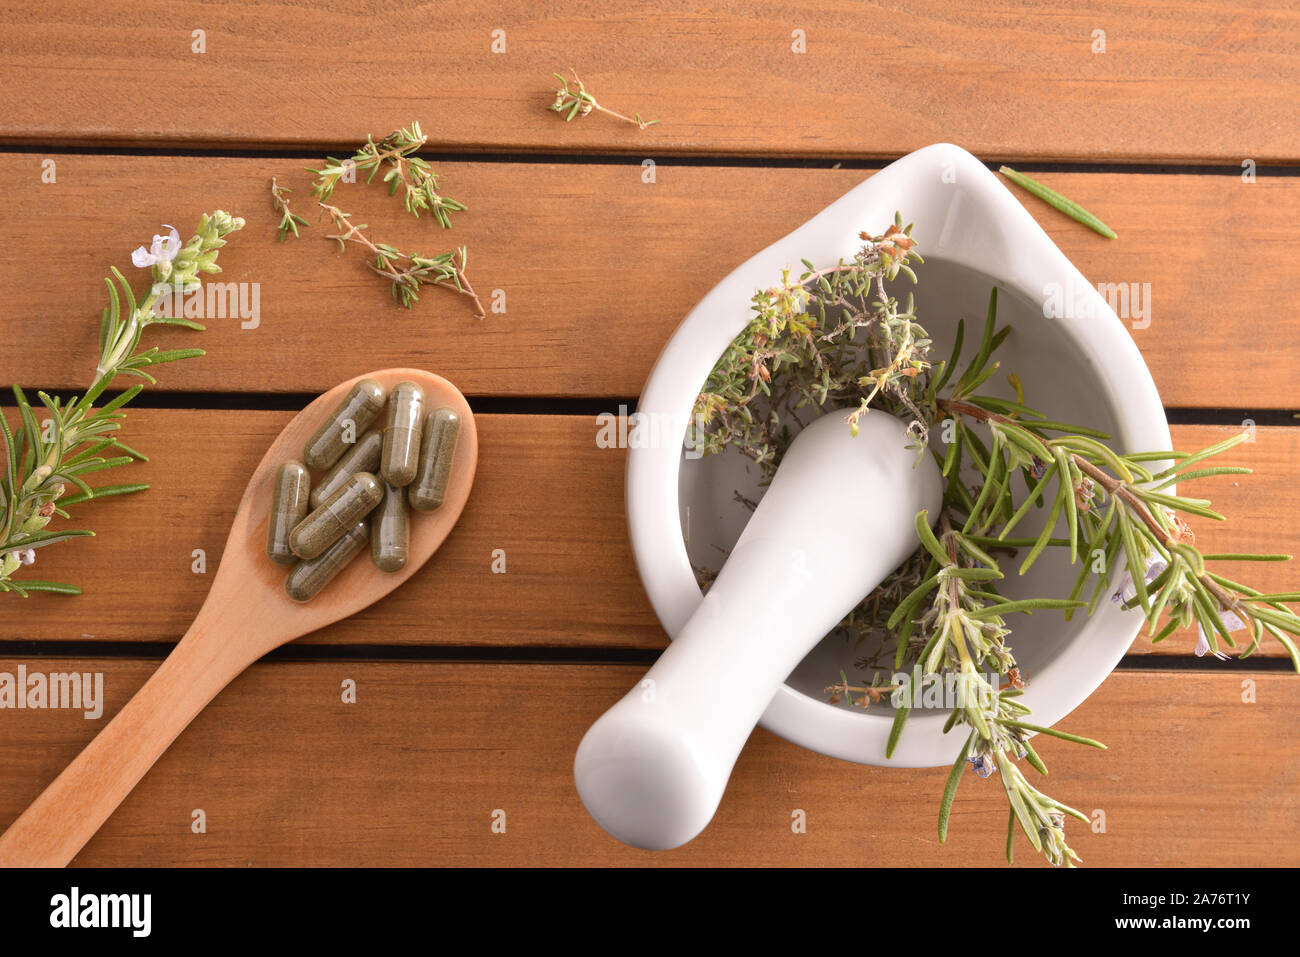 Mortar with herbs for processing natural capsules on wooden spoon on table. Alternative natural medicine concept. Top view. Horizontal composition. Stock Photo